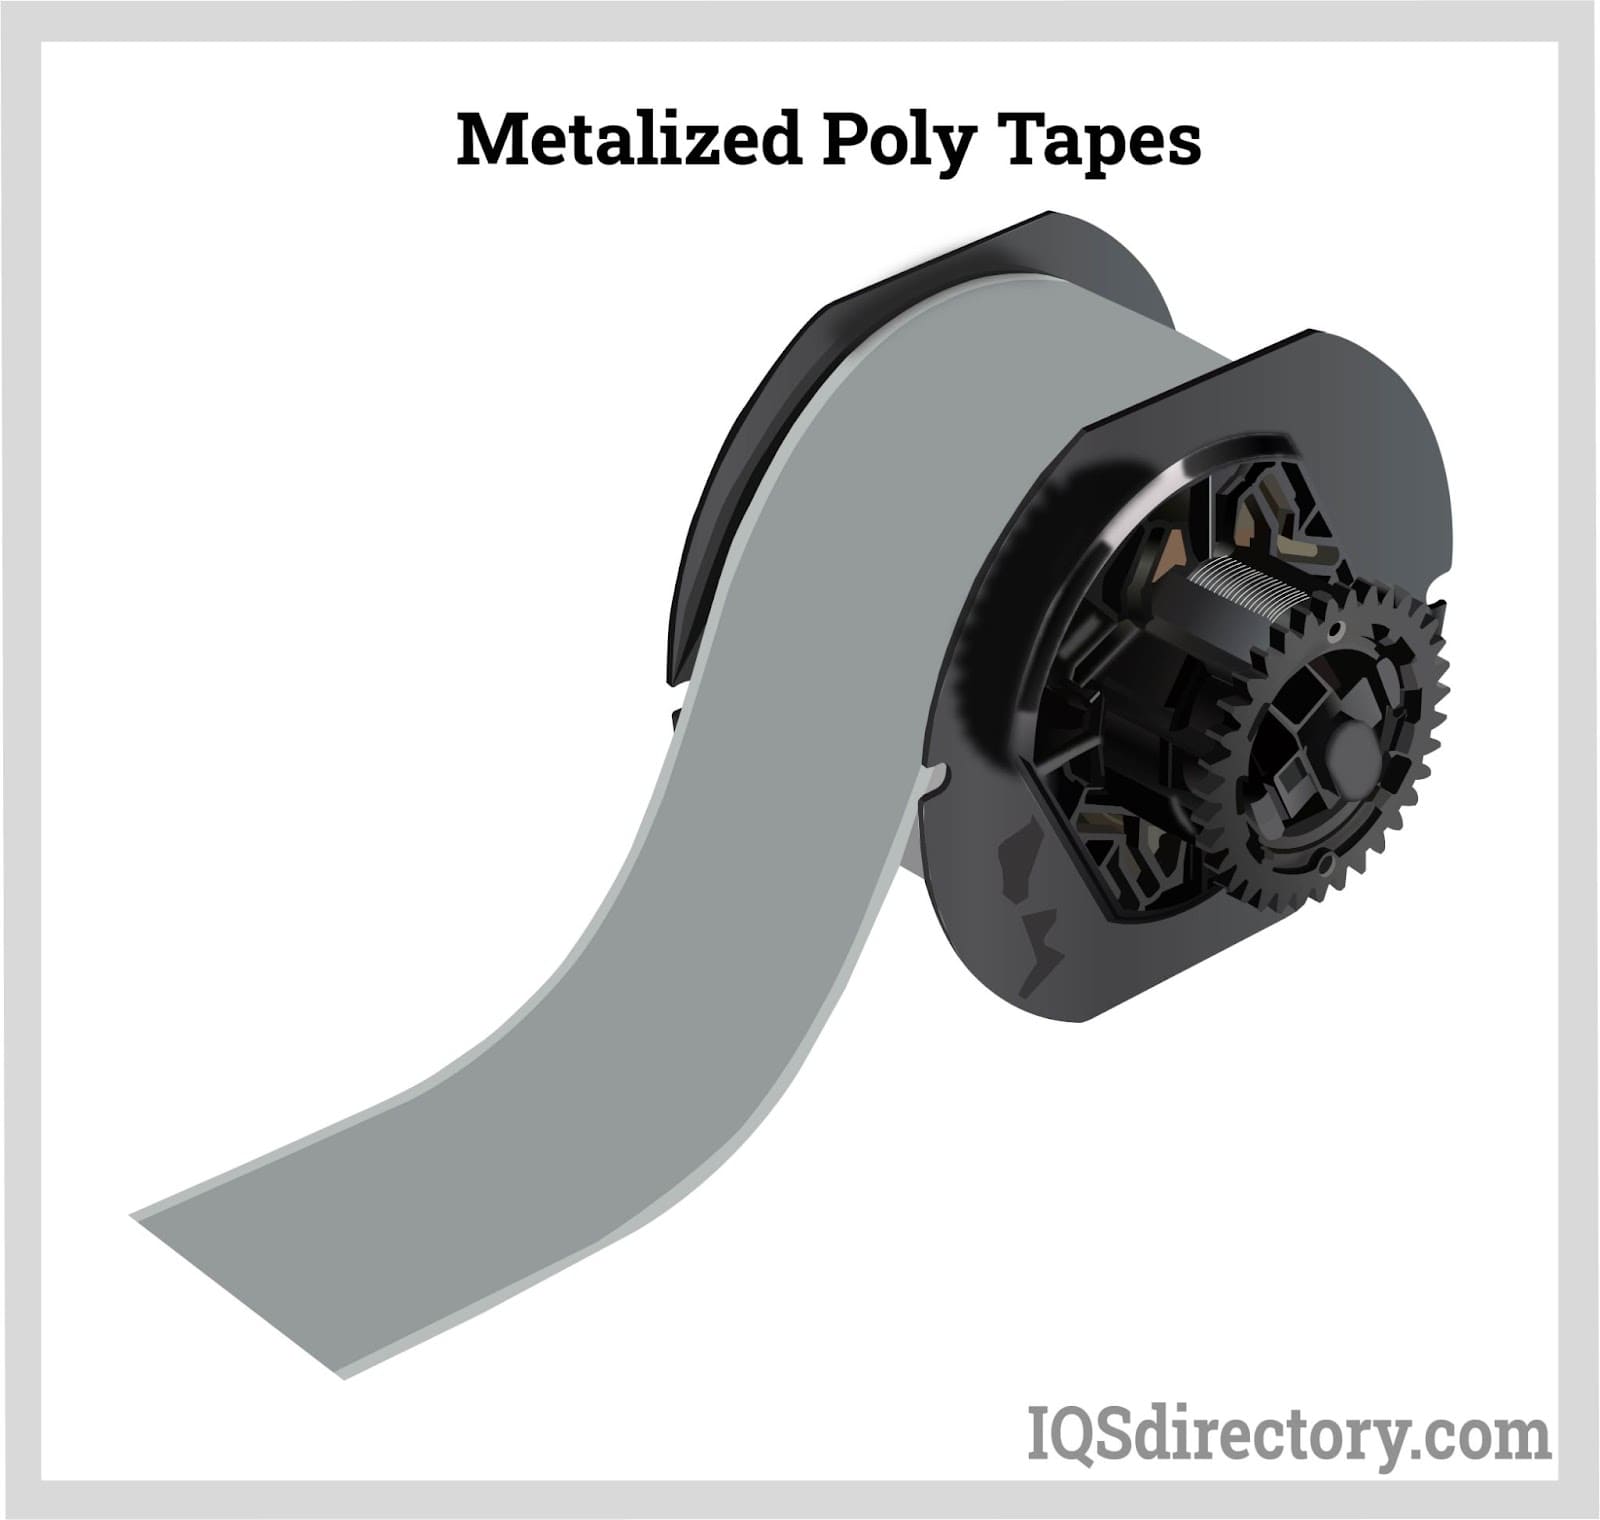 Metalized PolyTapes